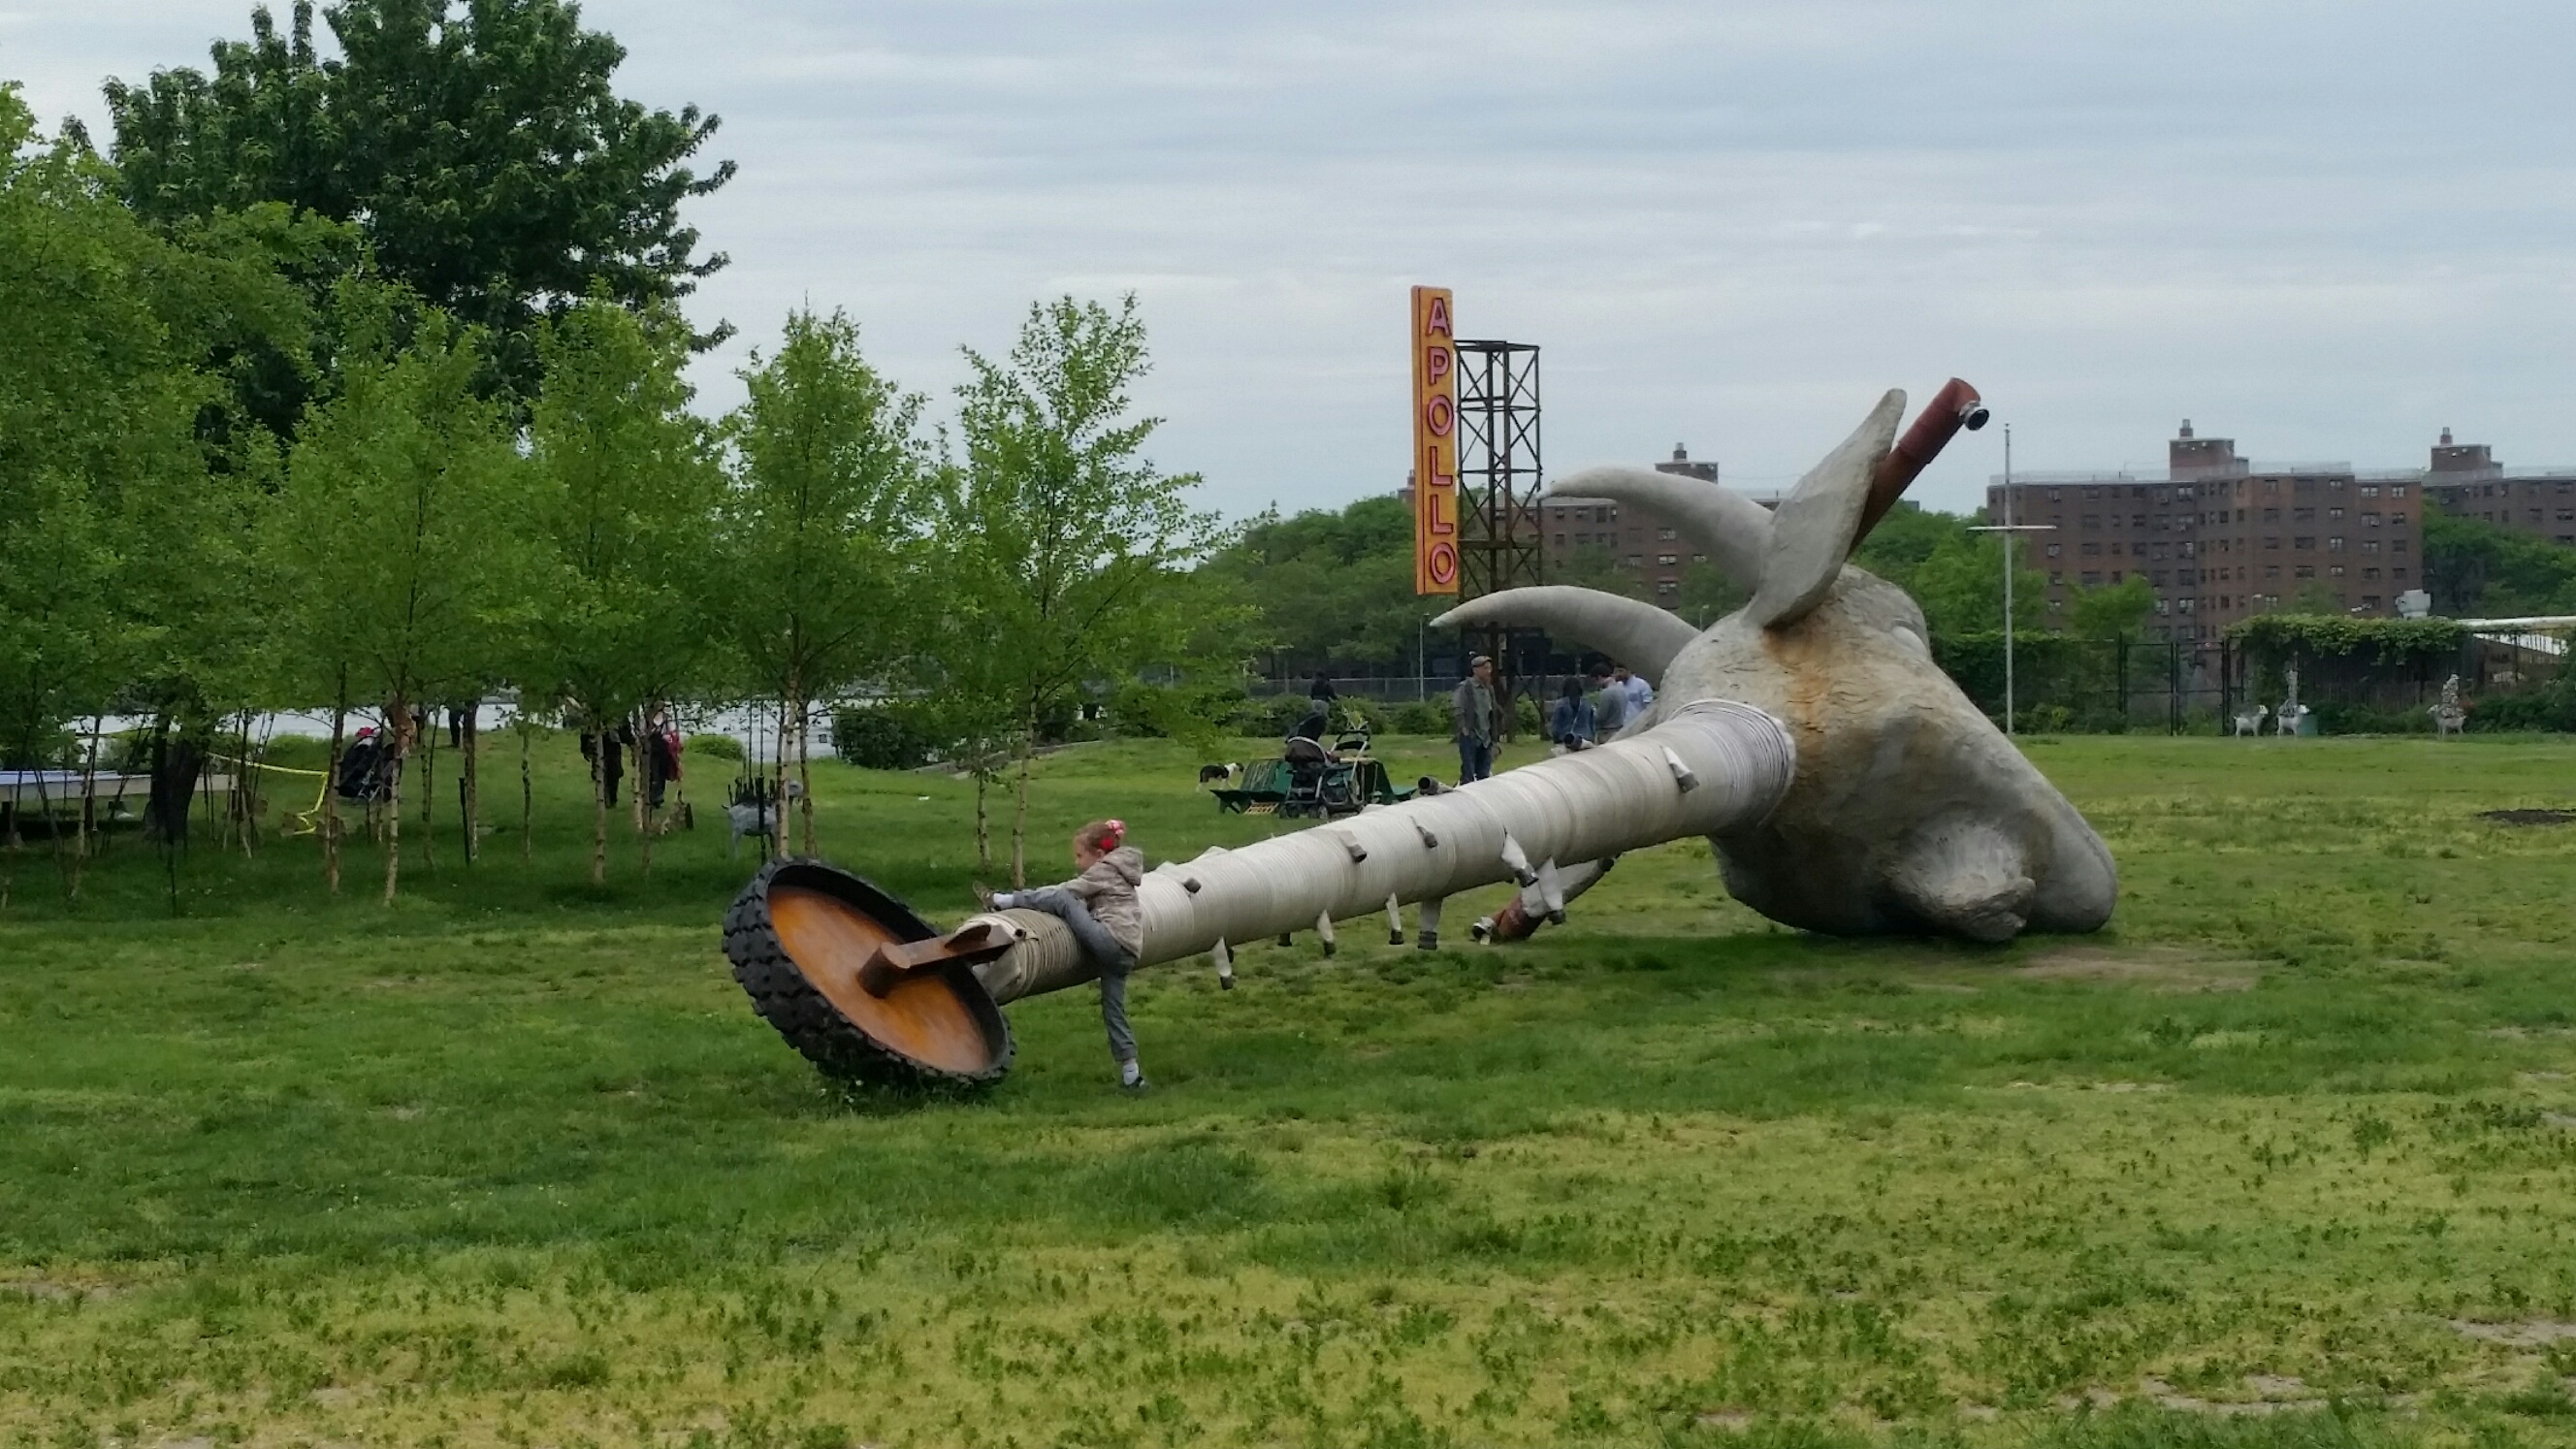 Support Socrates Sculpture Park at Their Annual Benefit Gala